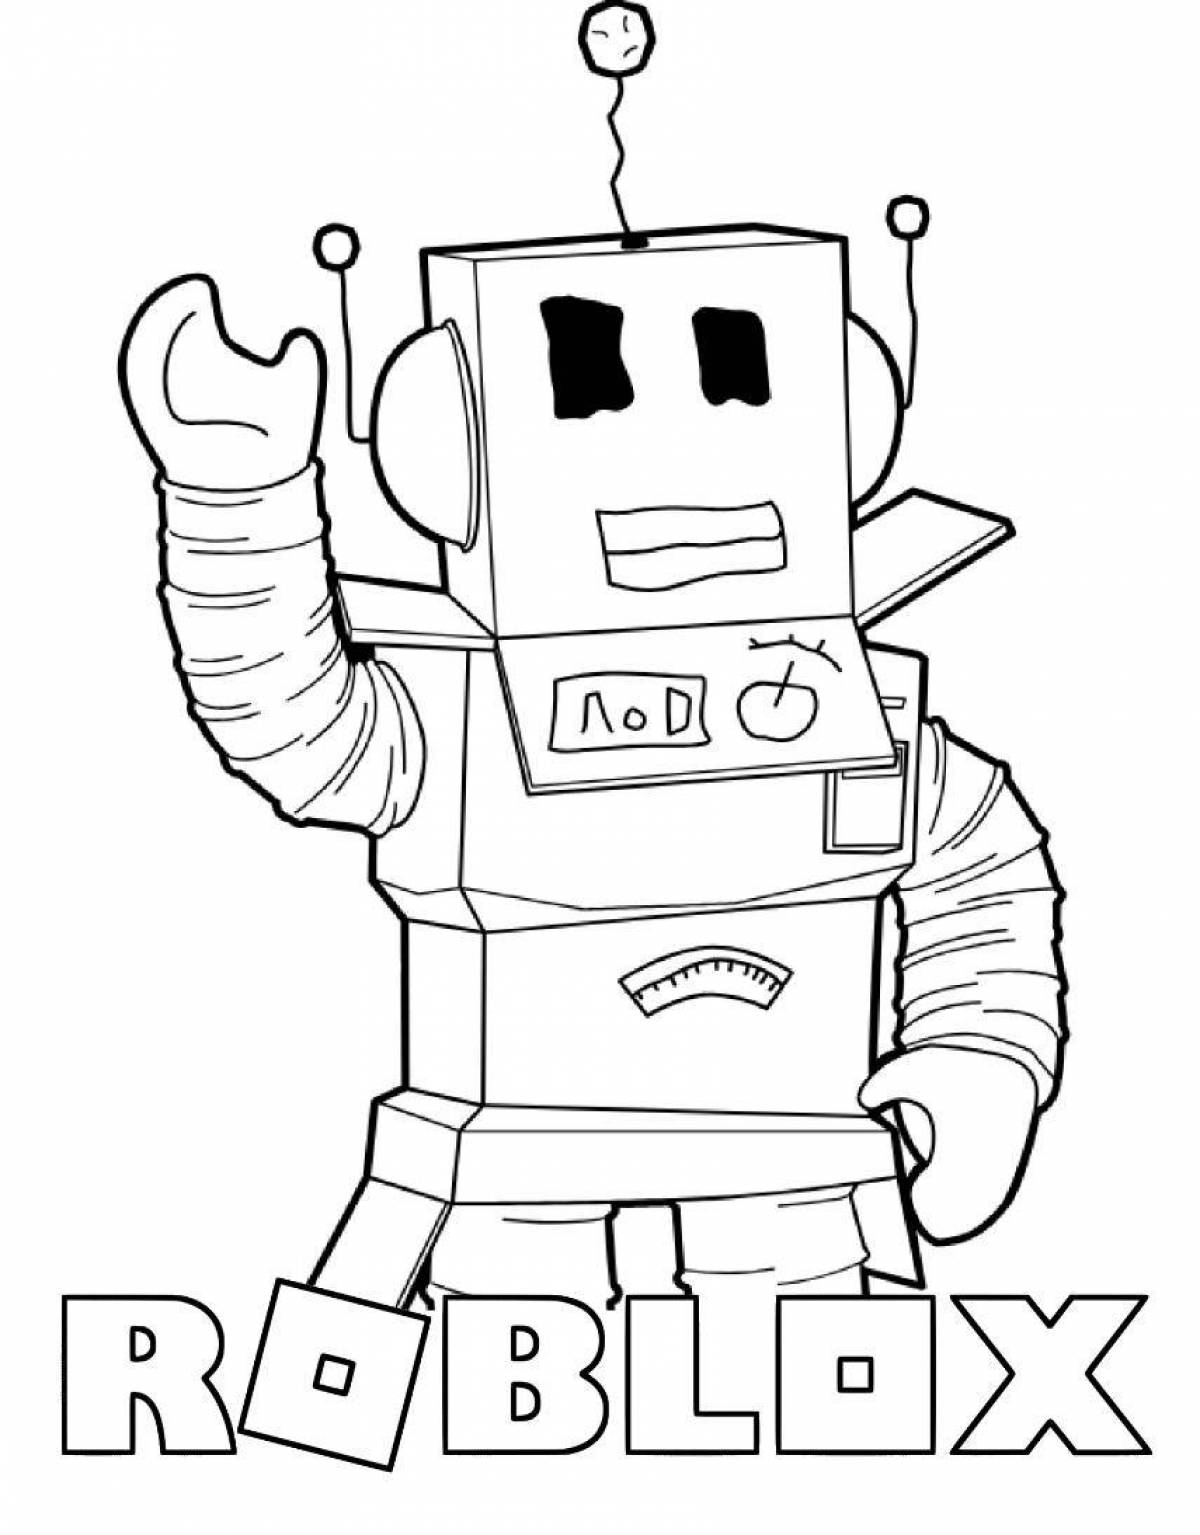 Colorful roblox man coloring page